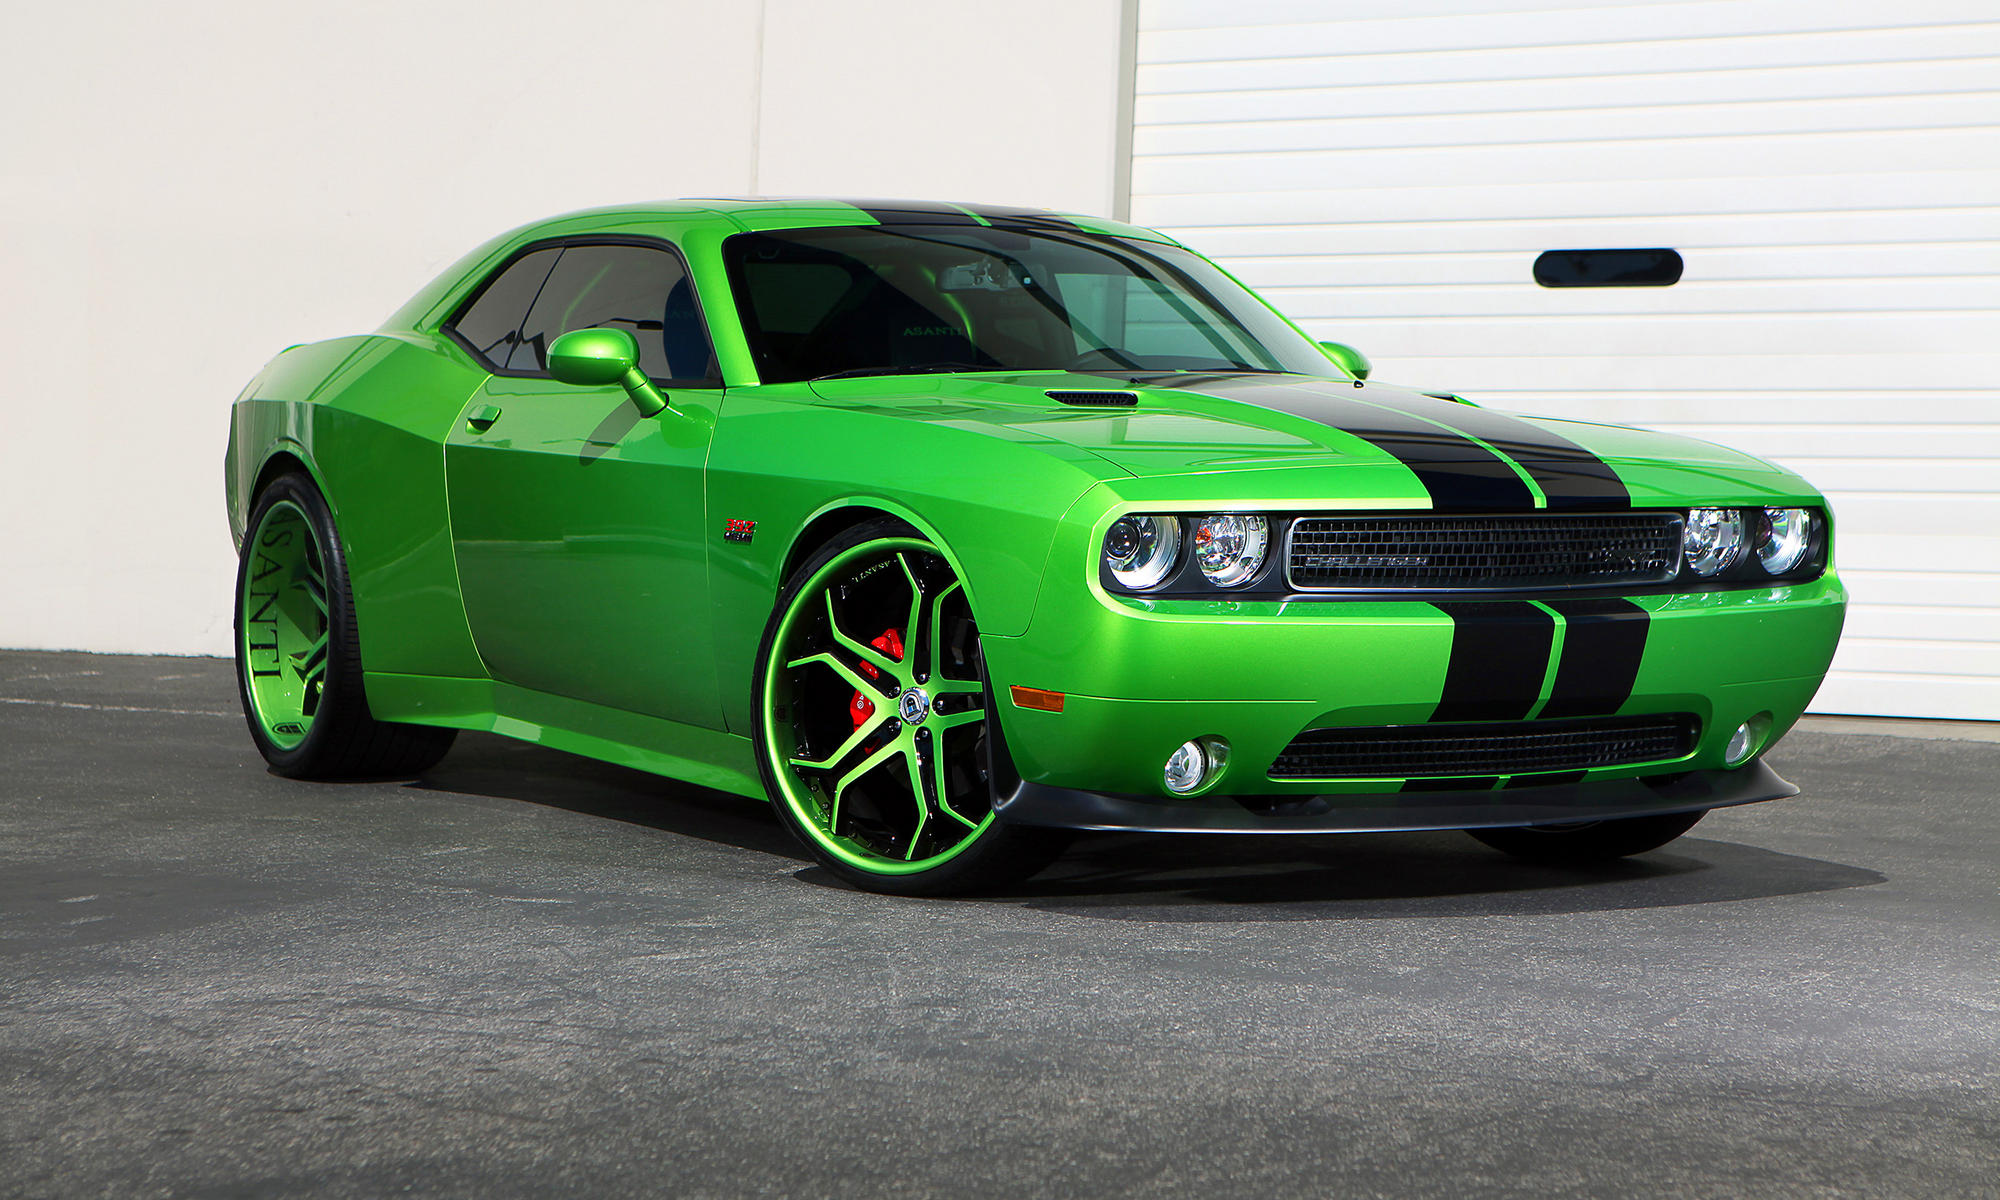 Green Dodge Challenger with custom green and black cx-173 wheels